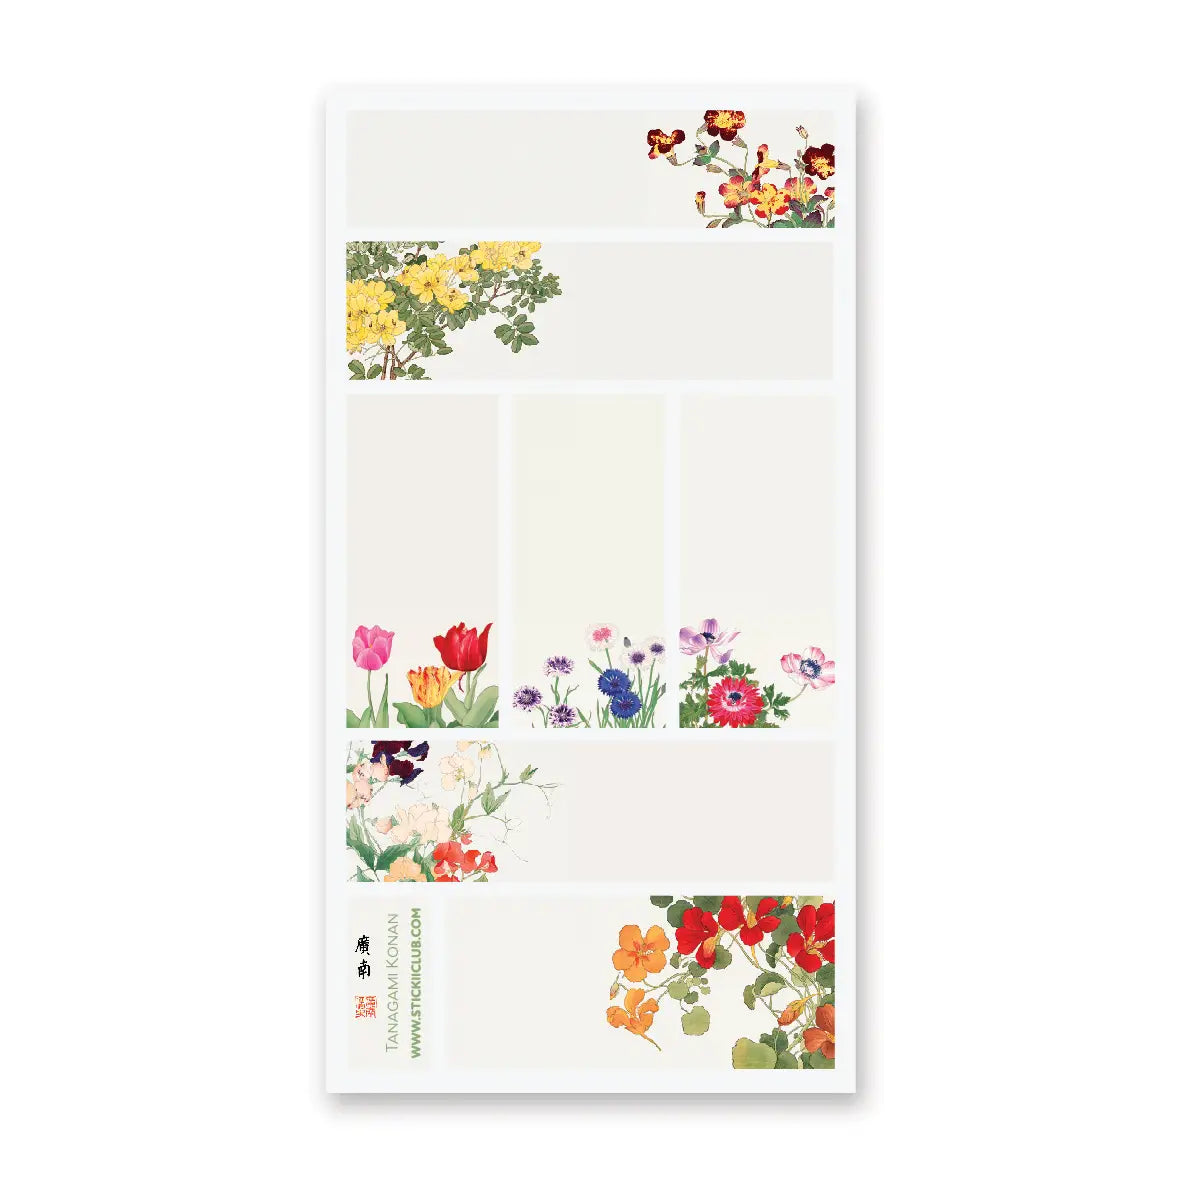 Sticker Sheet - Smell The Flowers Labels